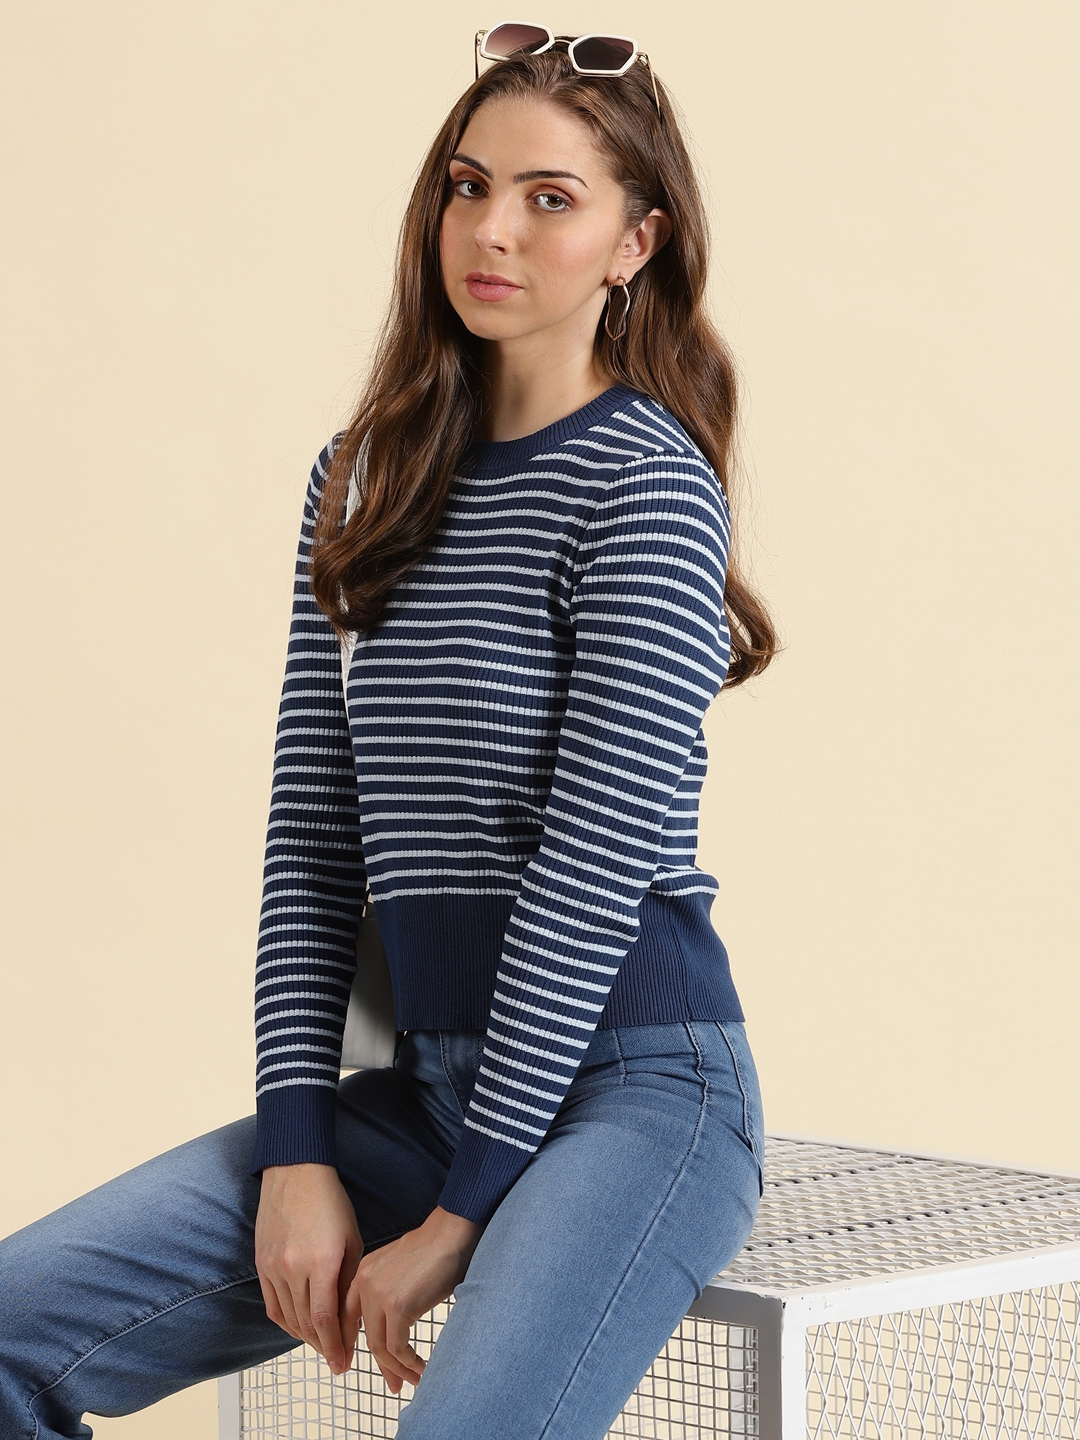 Showoff | SHOWOFF Women's High Neck Striped NavyBlue Fitted Regular Top 0